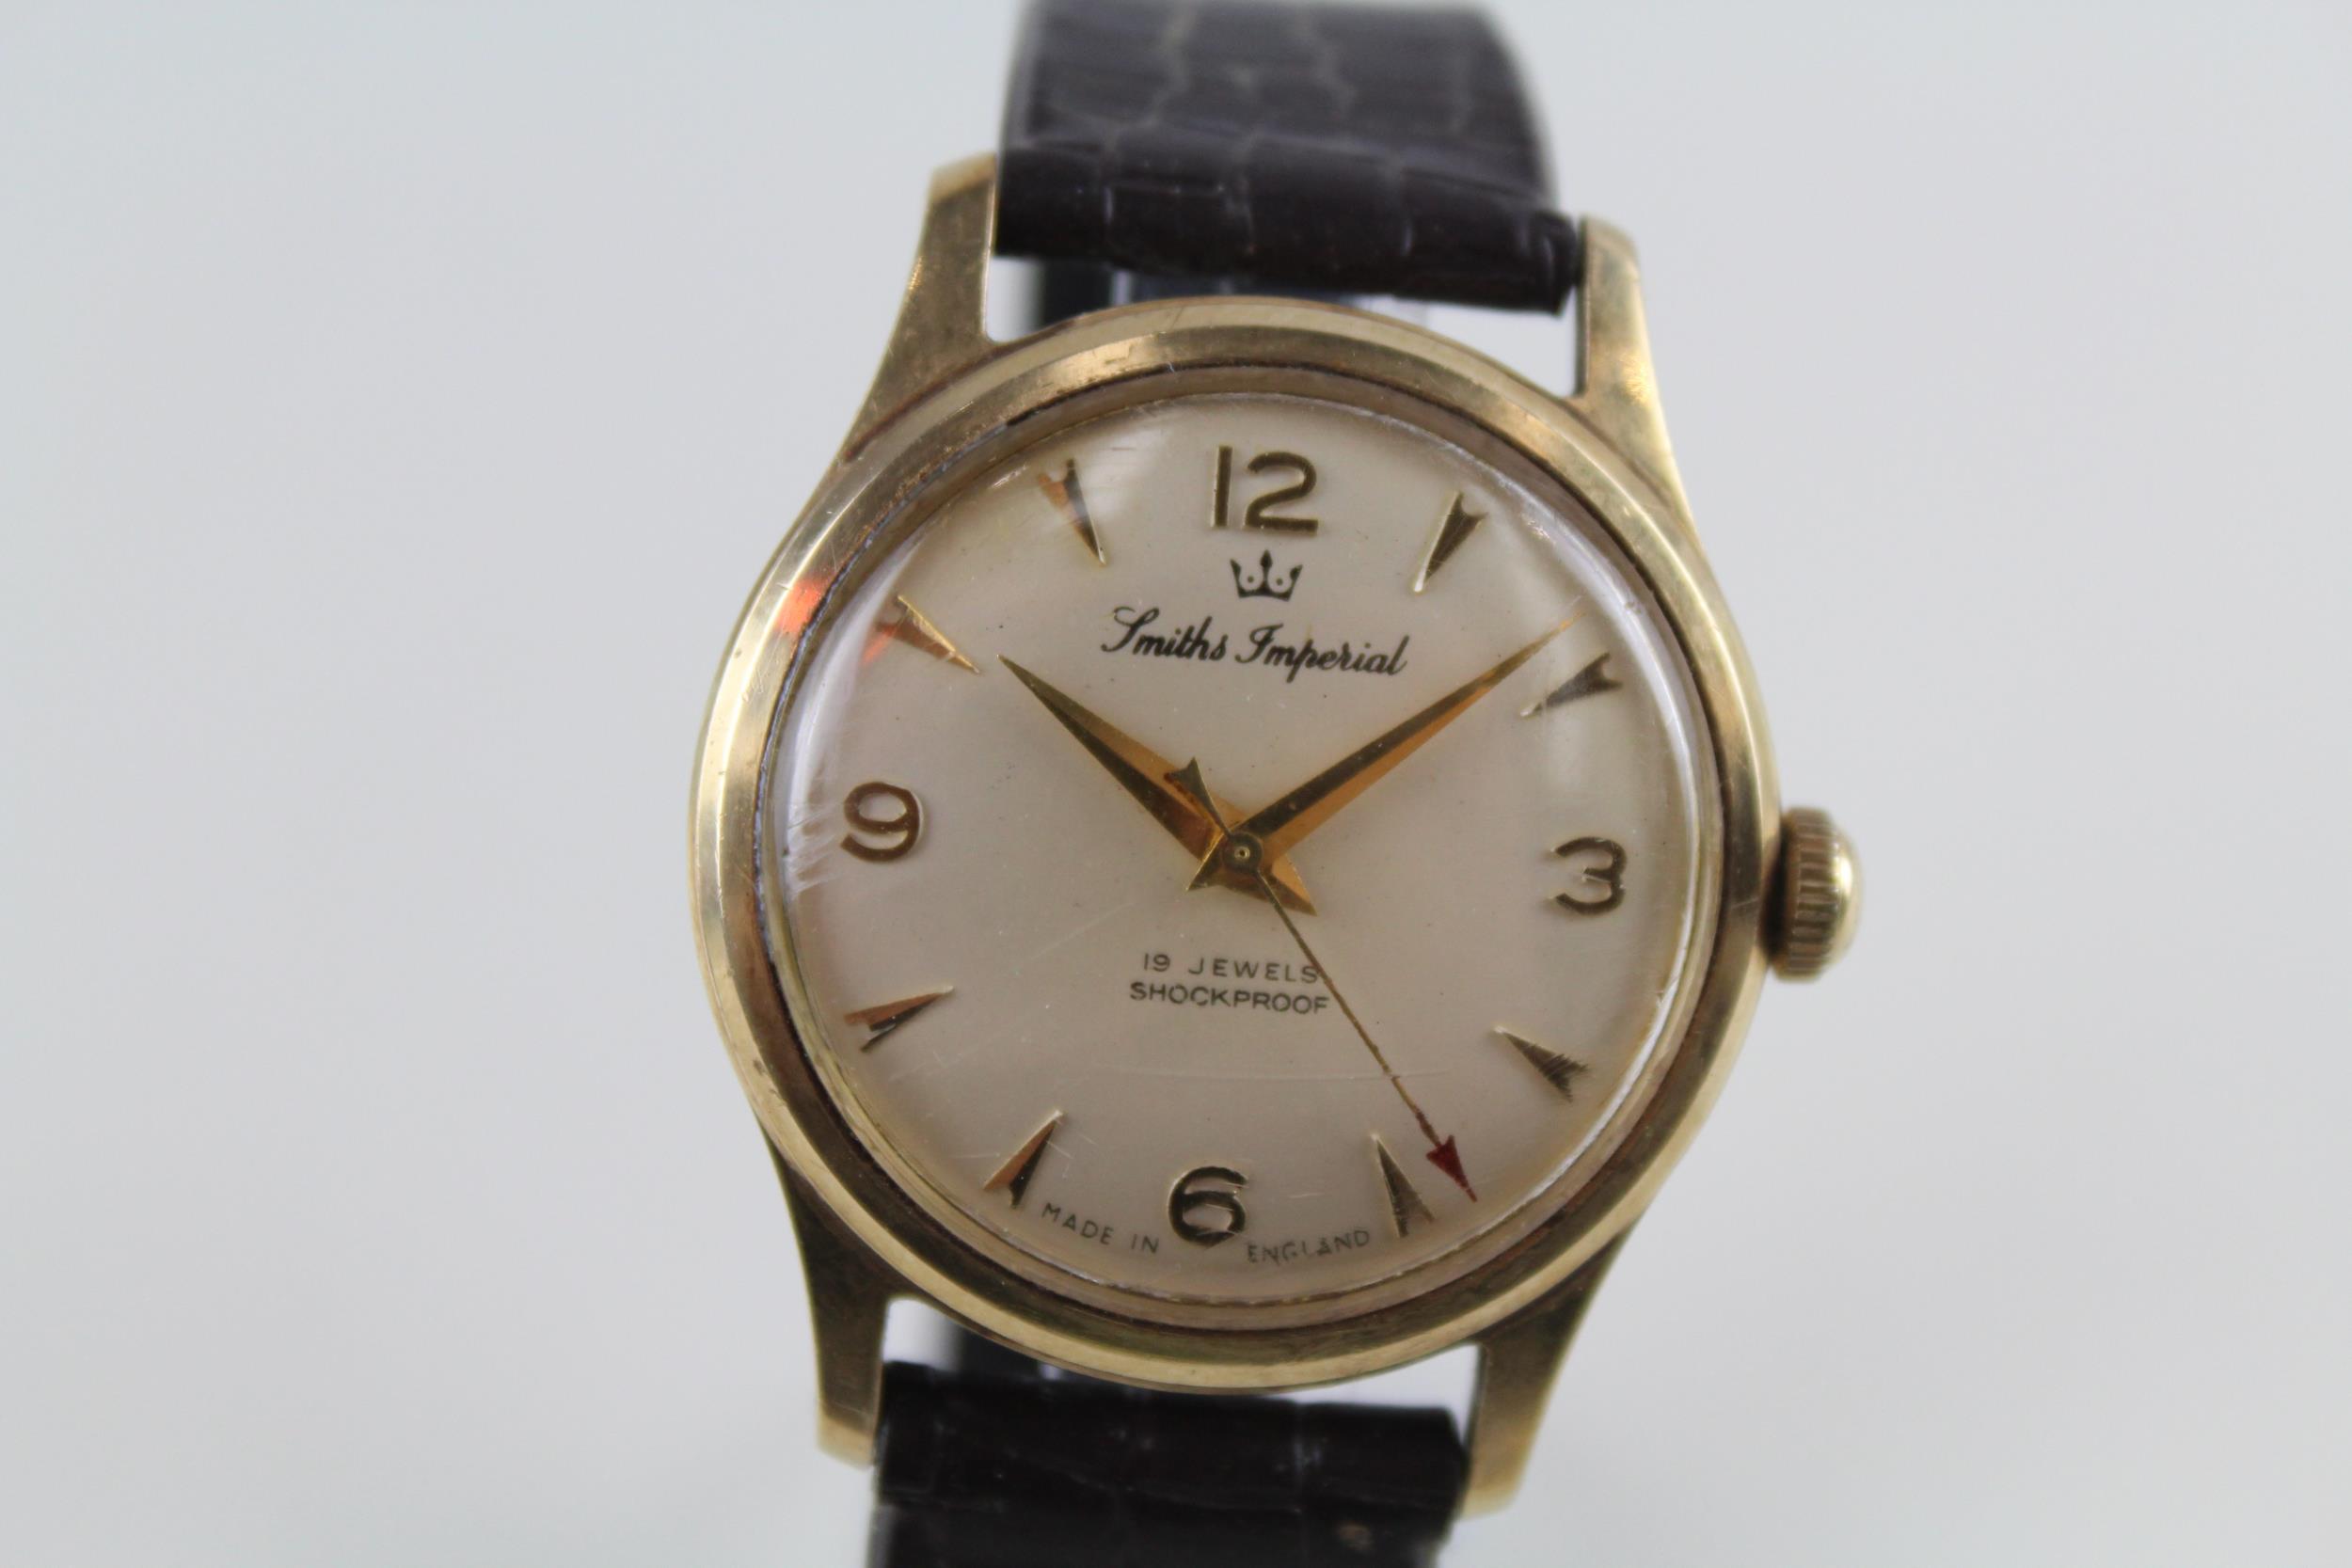 SMITHS IMPERIAL 9ct Gold Cased Gents Vintage WRISTWATCH Hand-wind WORKING // SMITHS IMPERIAL 9ct - Image 2 of 6